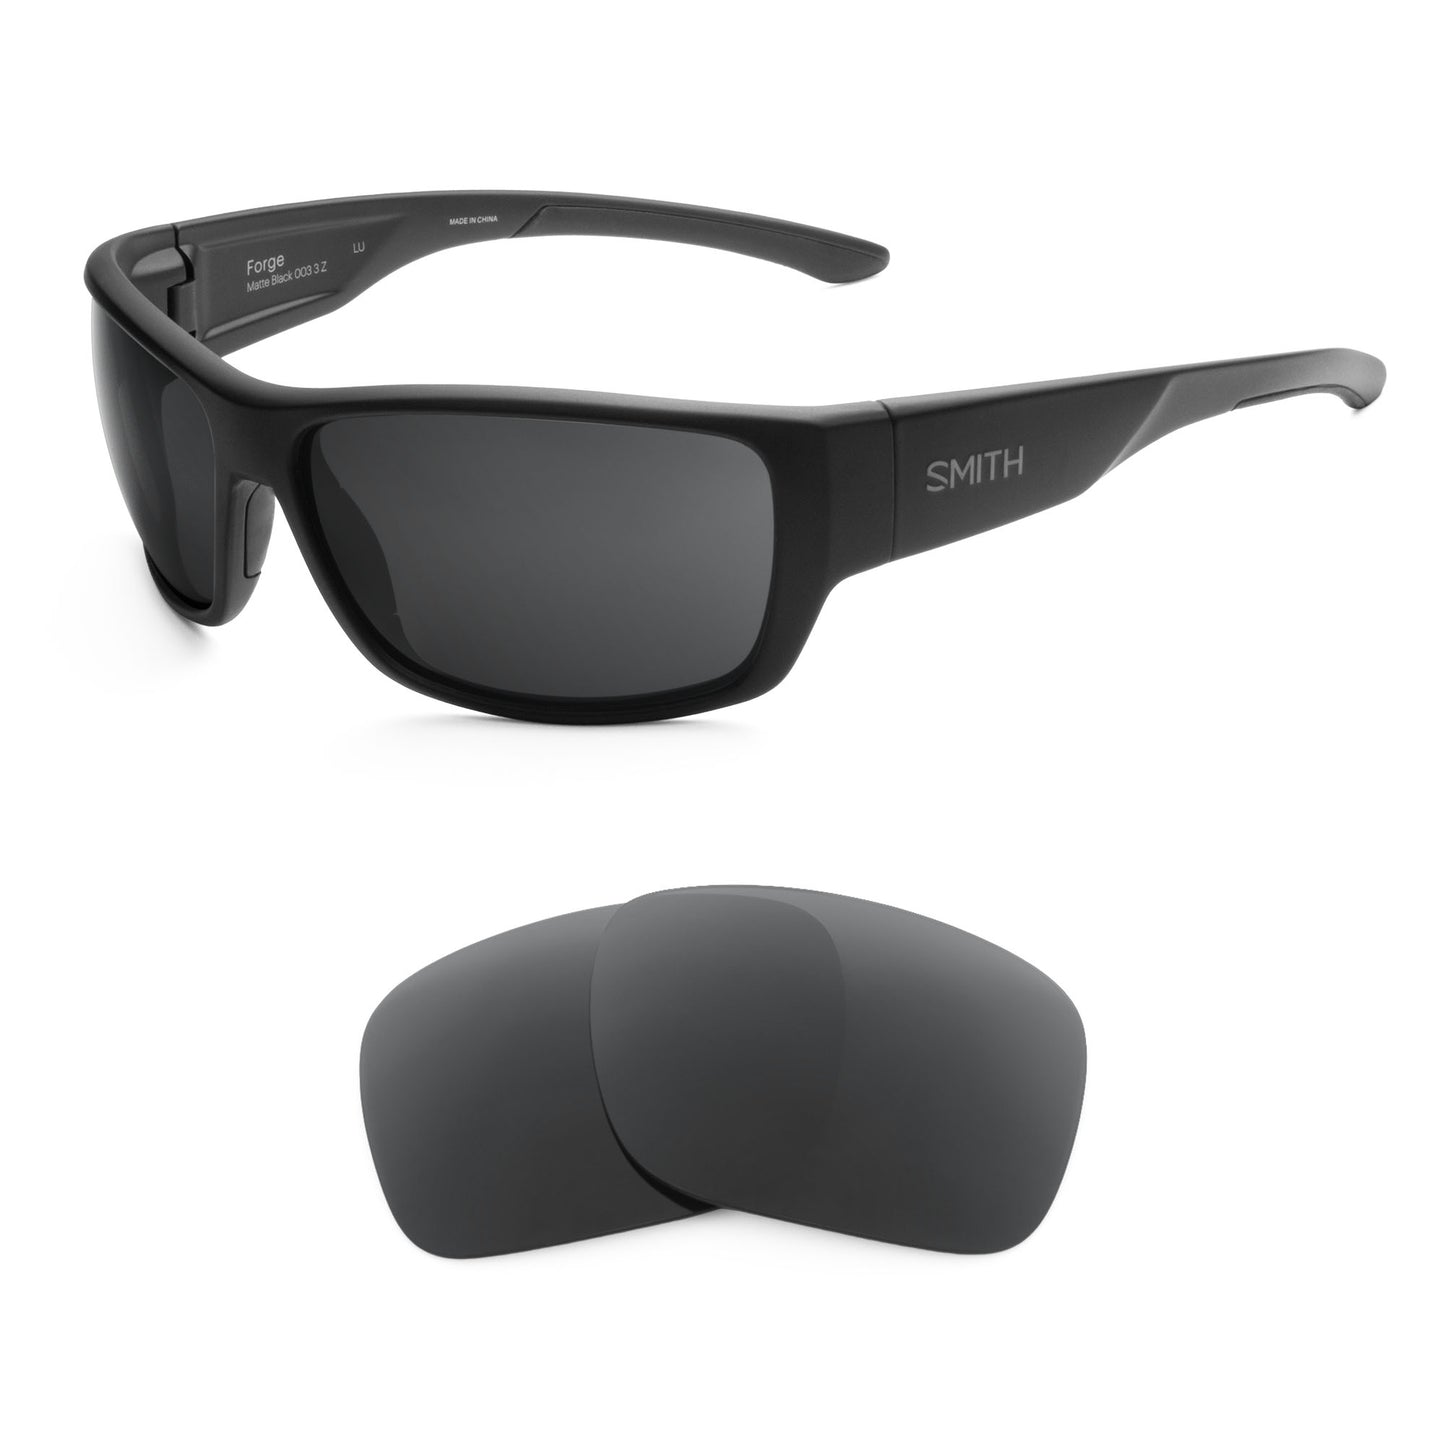 Smith Forge sunglasses with replacement lenses